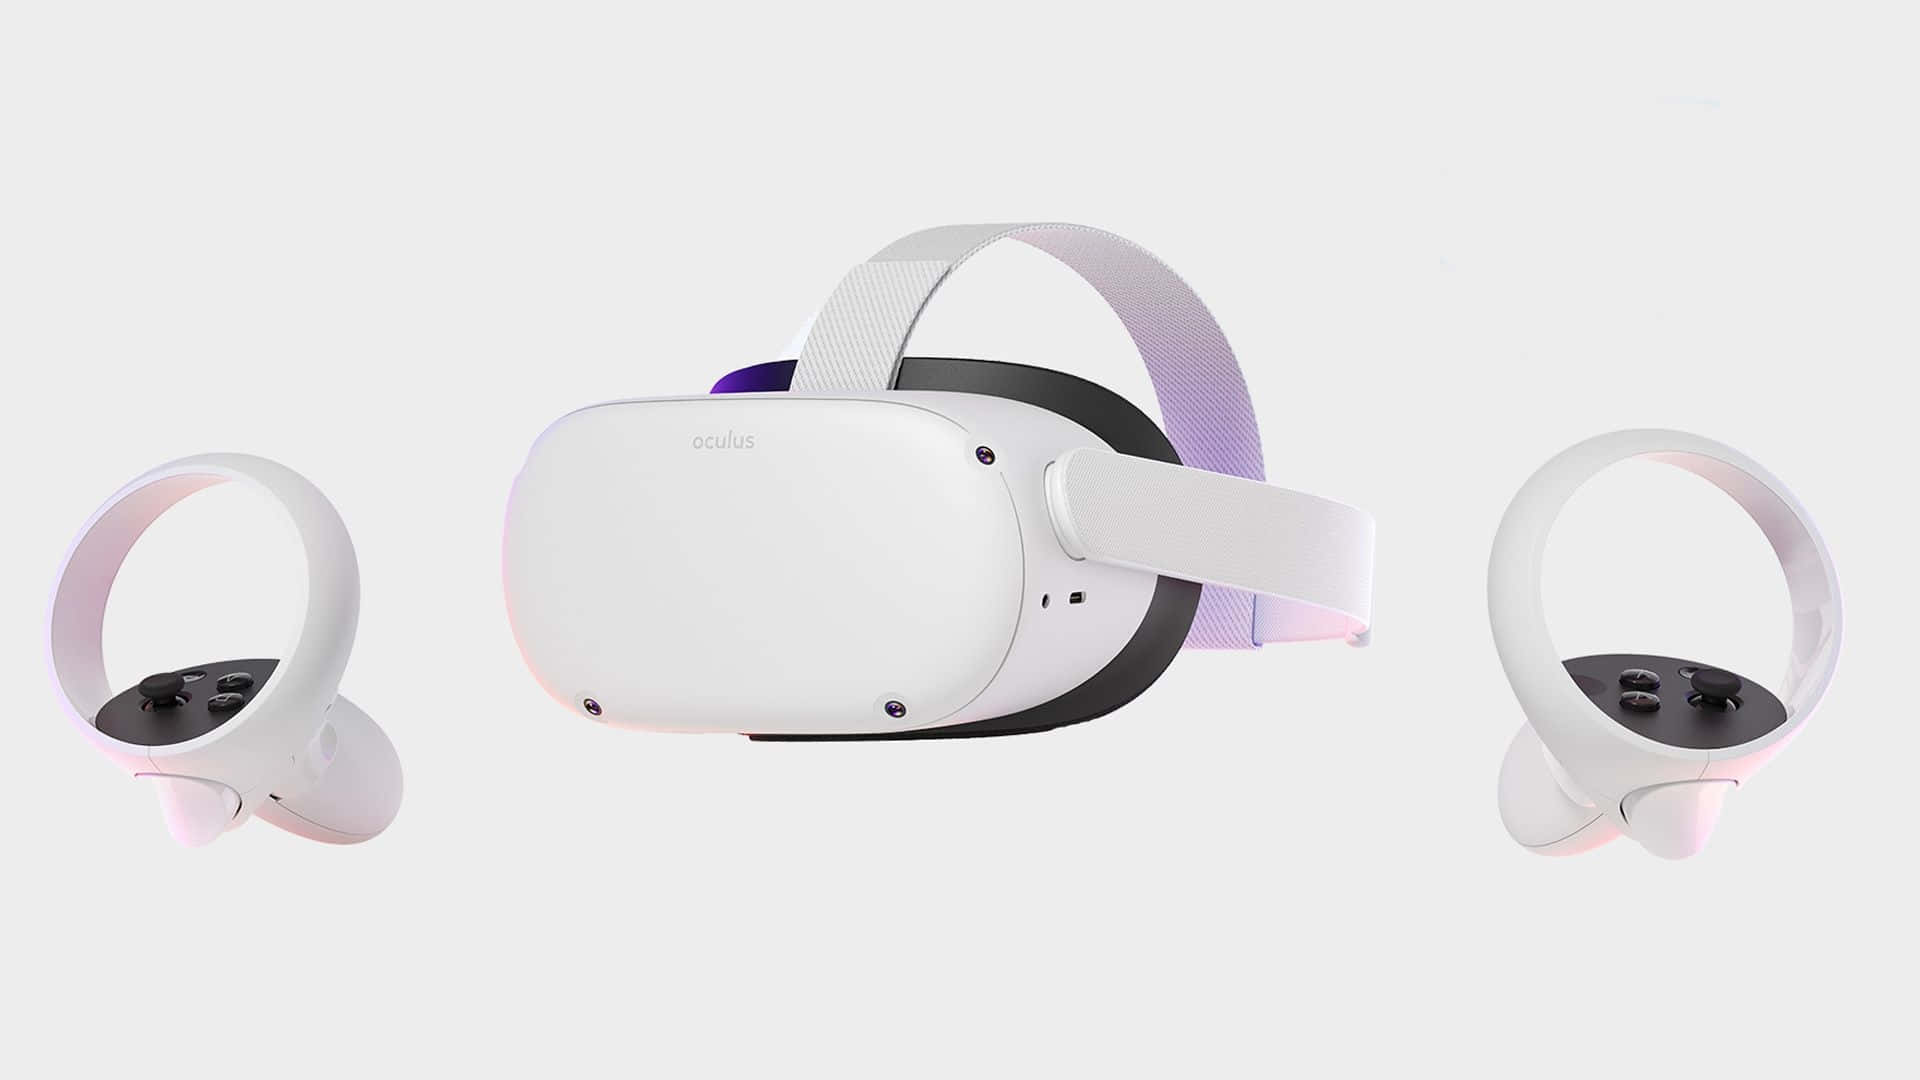 “Experience the Future of Virtual Reality with the Oculus Quest 2”